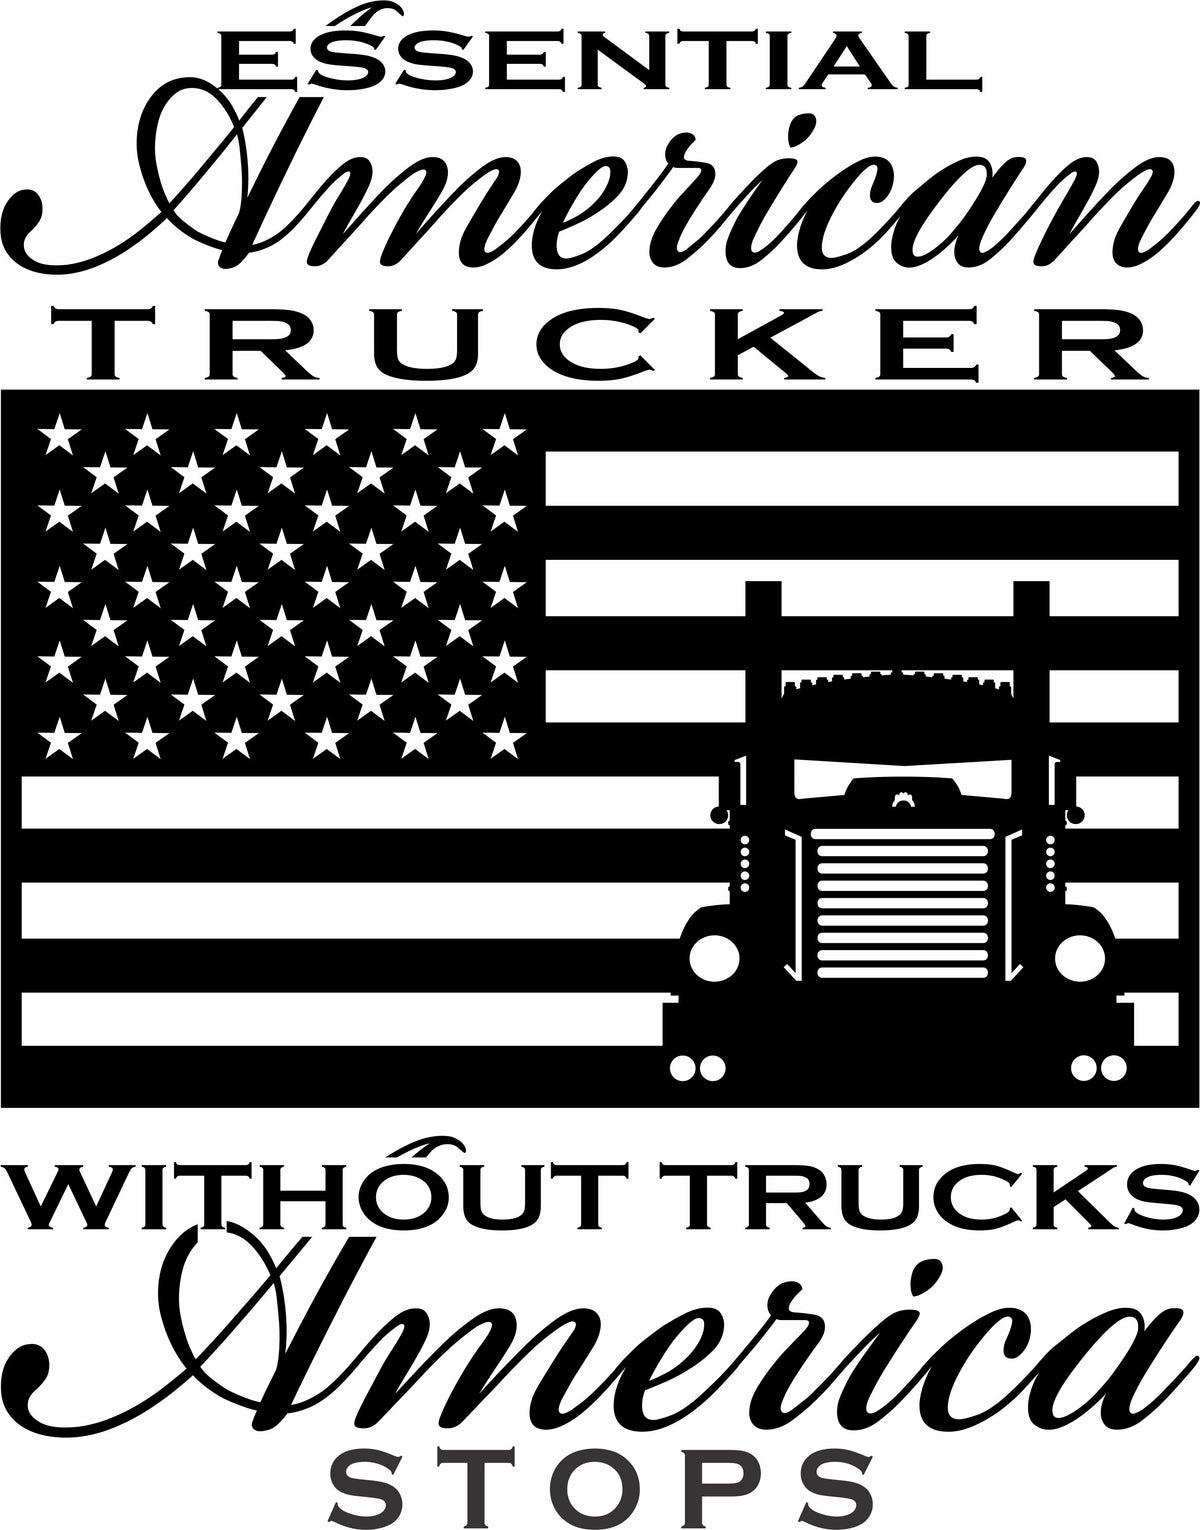 Essential American Trucker KW Vinyl Decal Free Shipping